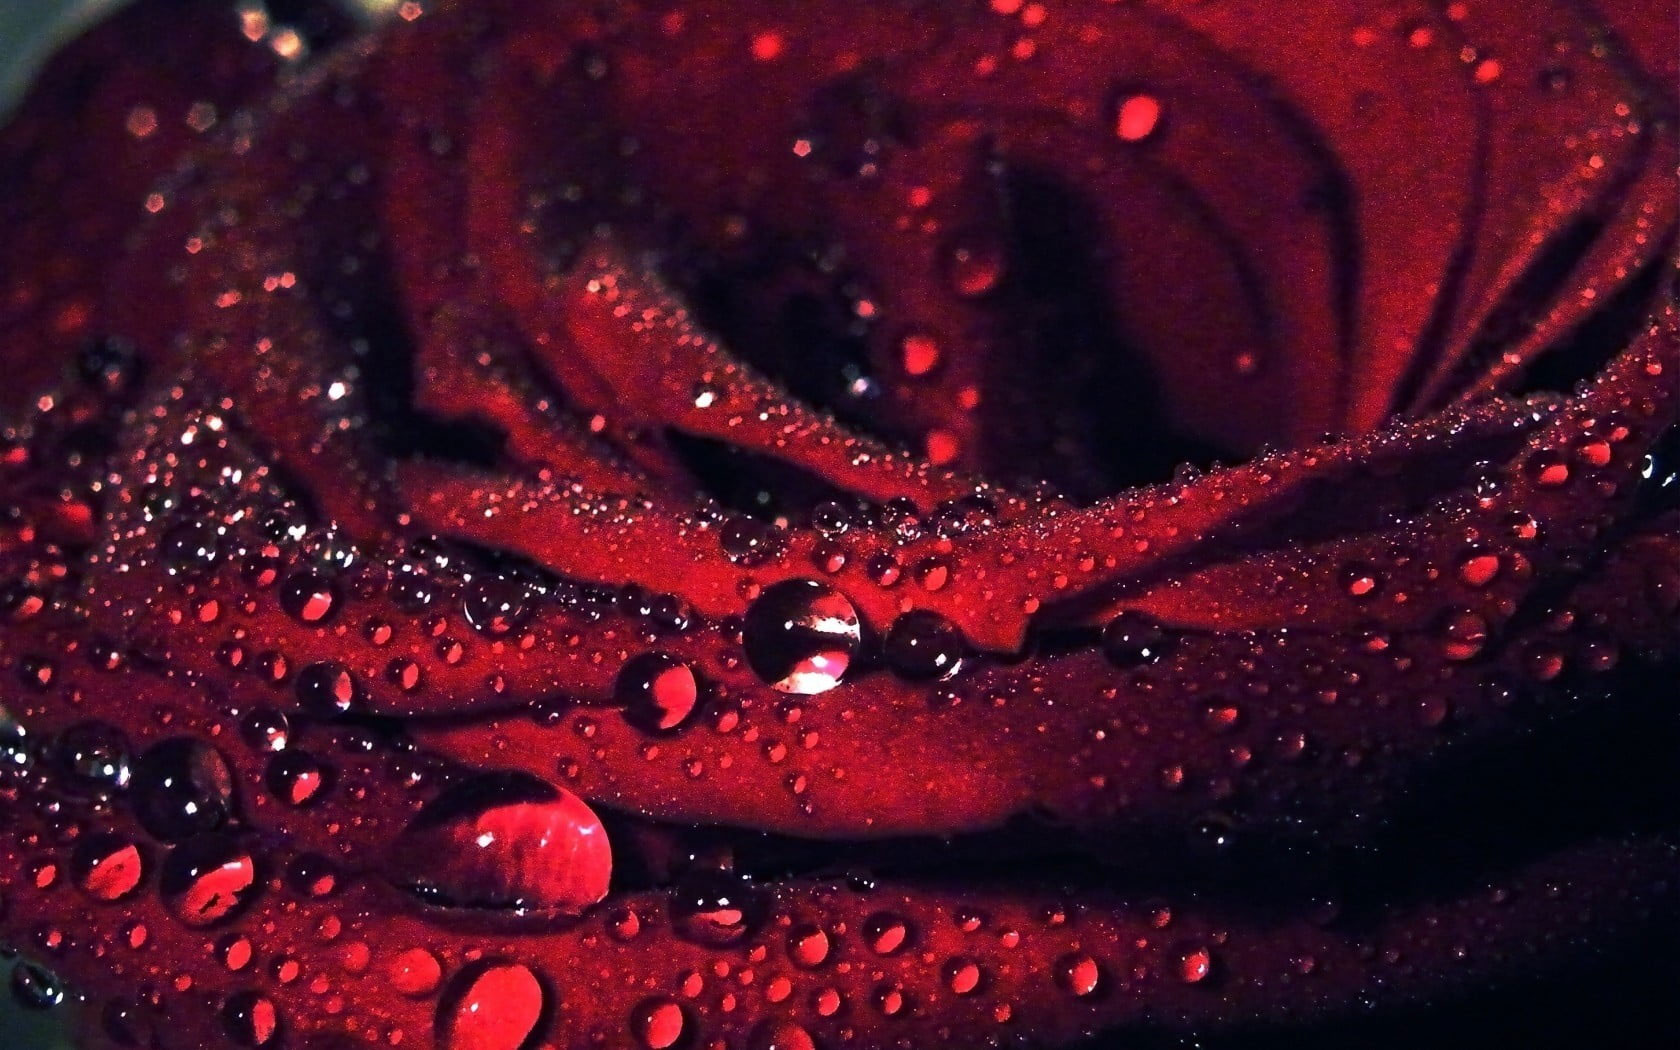 Red rose wallpaper, macro, flowers, water drops, red flowers, plants, close-up